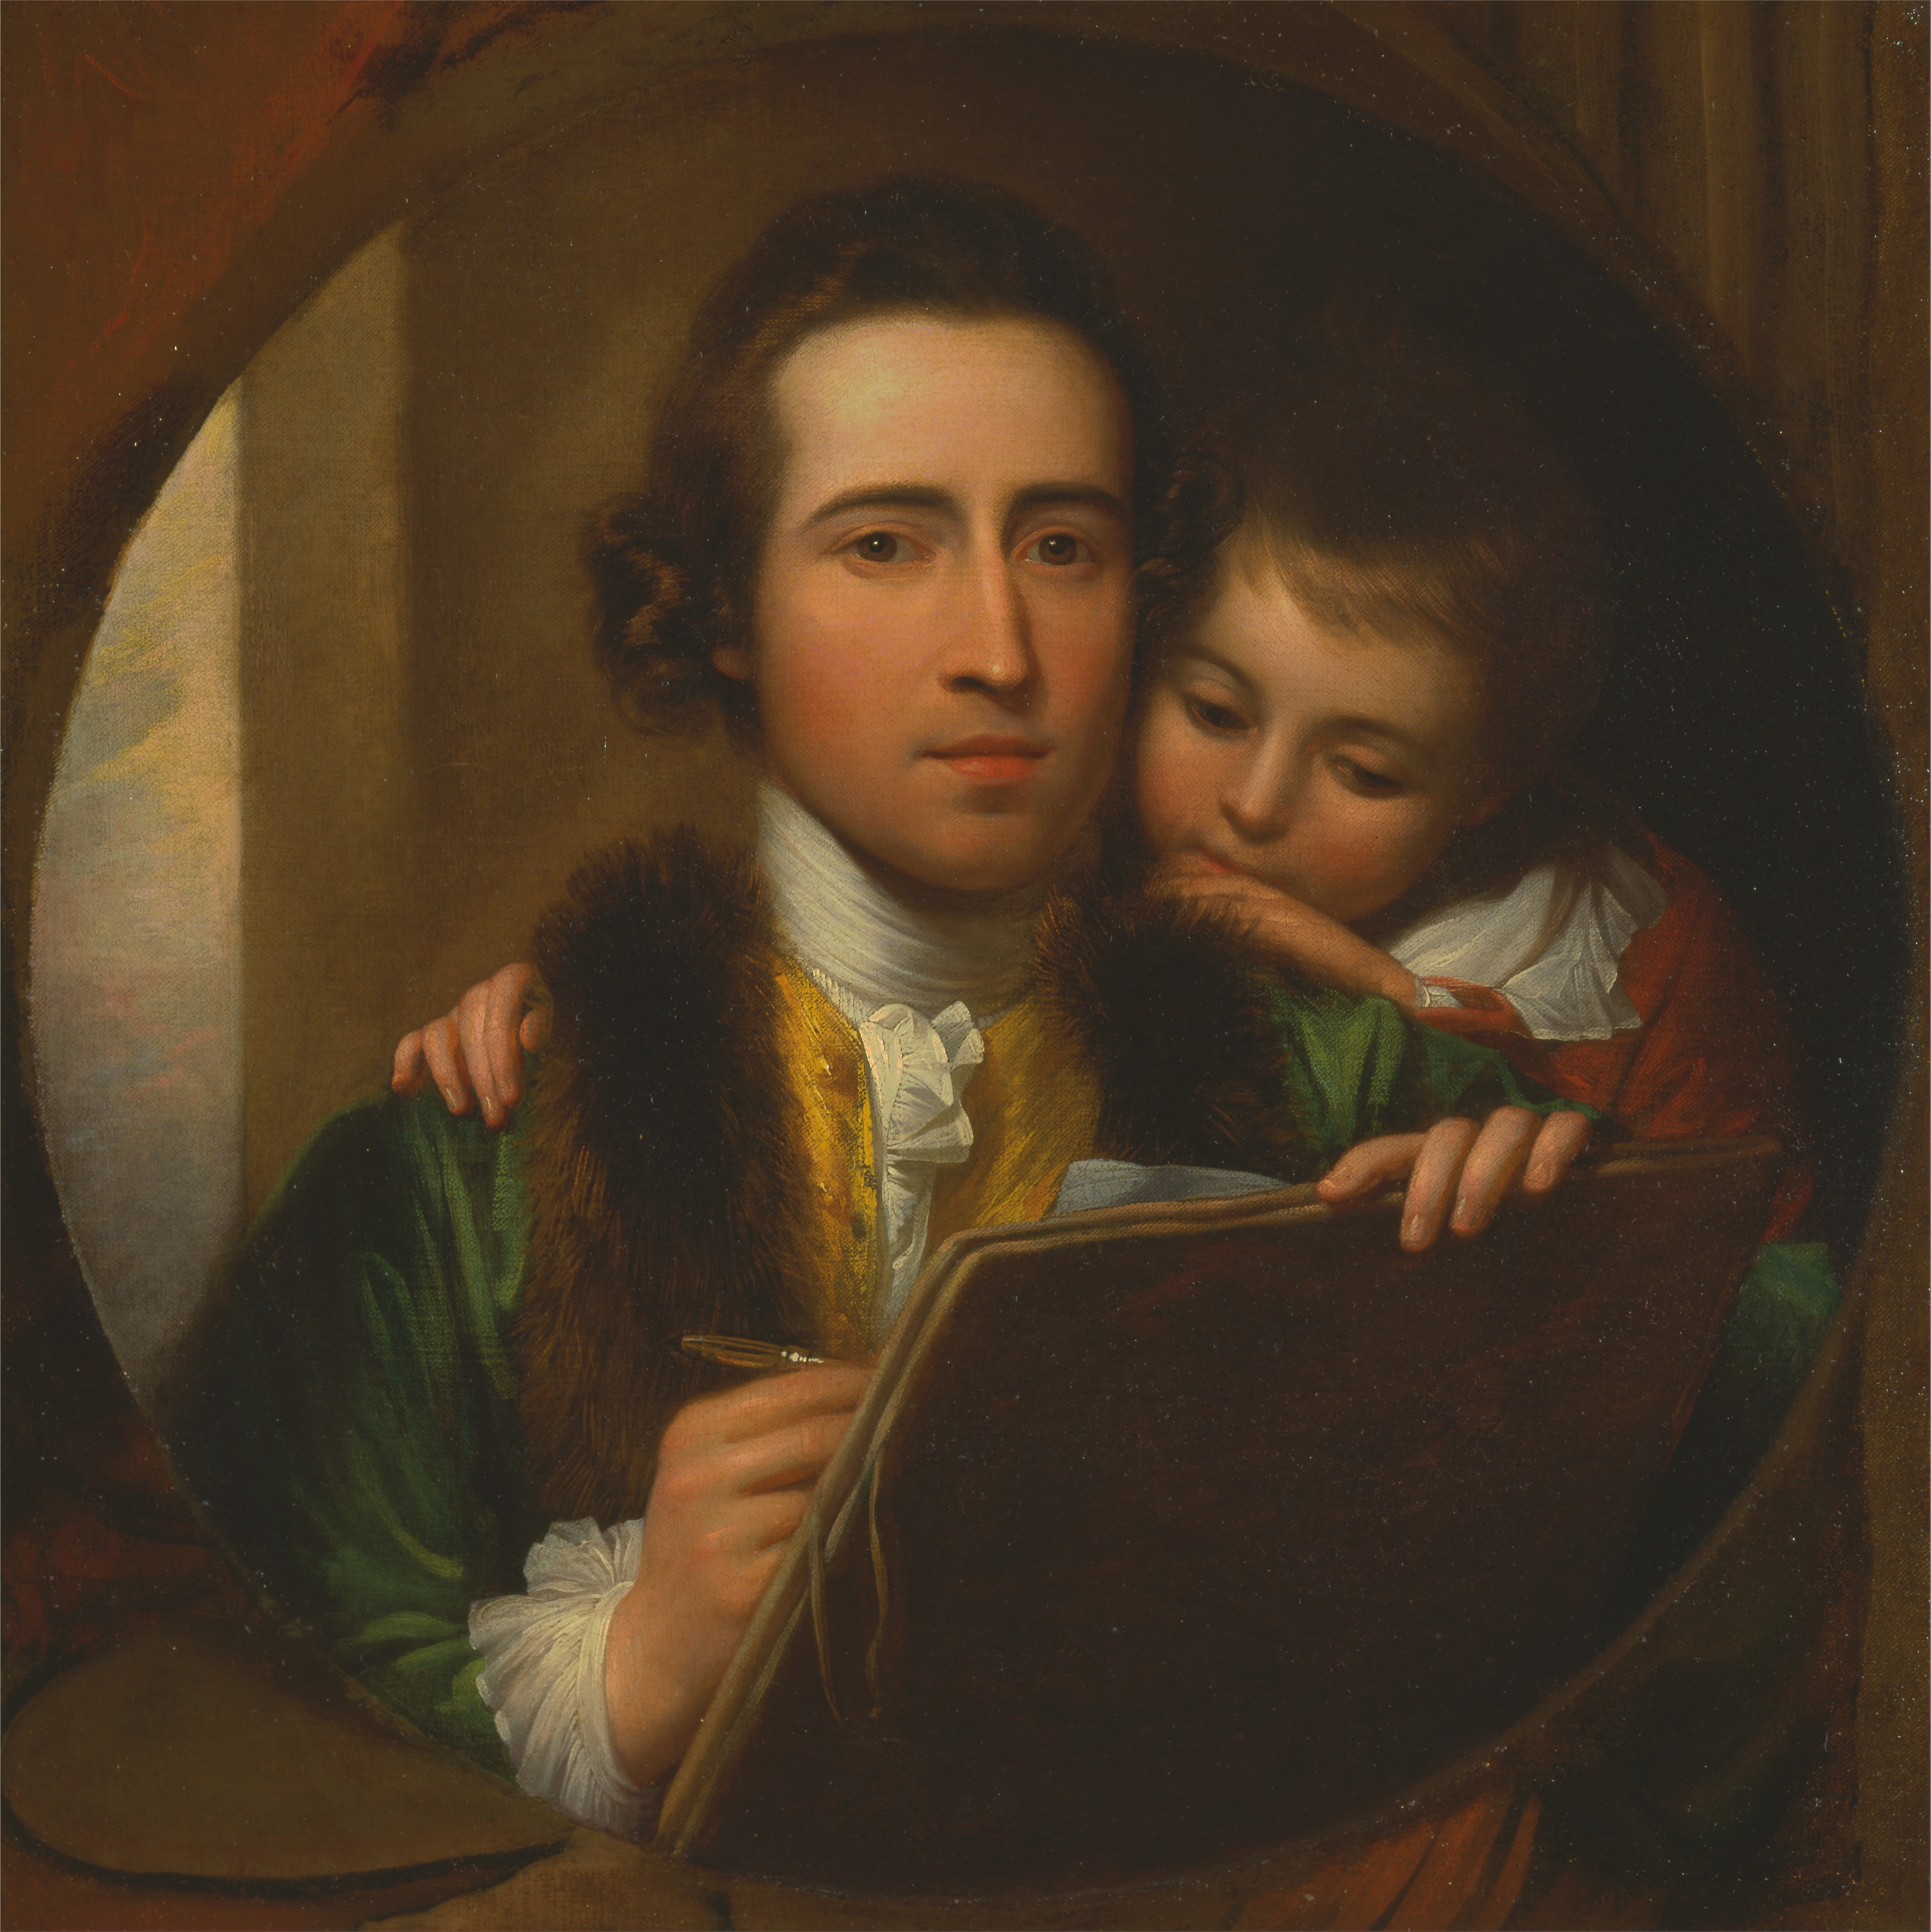 Benjamin West - The Artist and His Son Raphael - Google Art Project